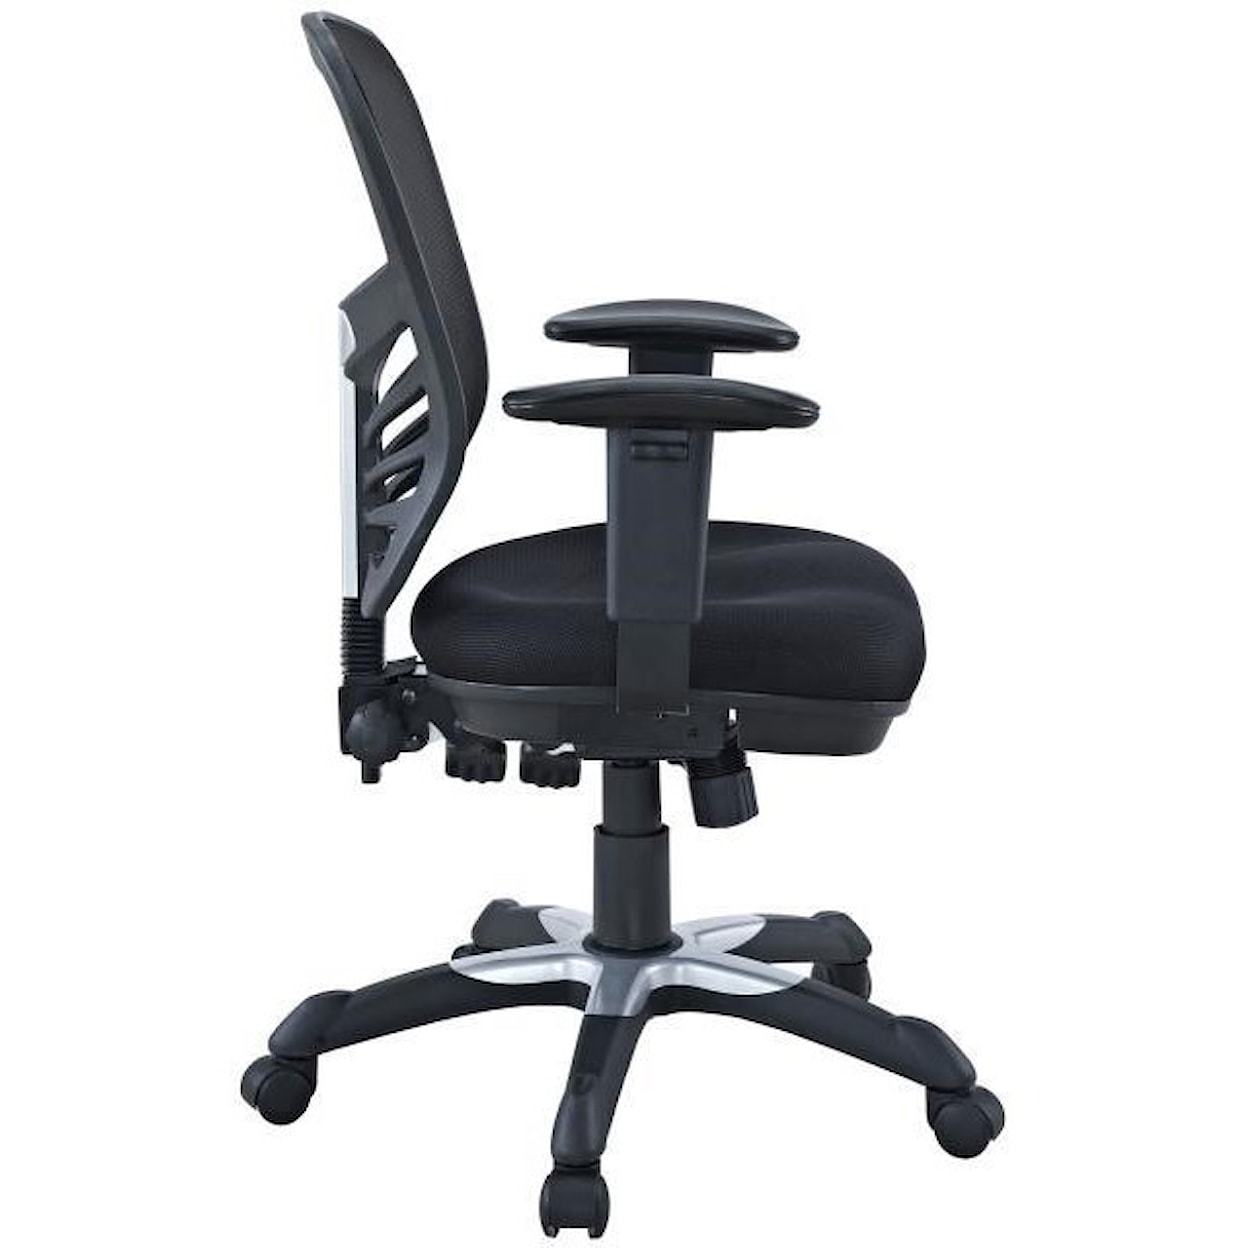 Modway Home Office Articulate Mesh Office Chair In Black